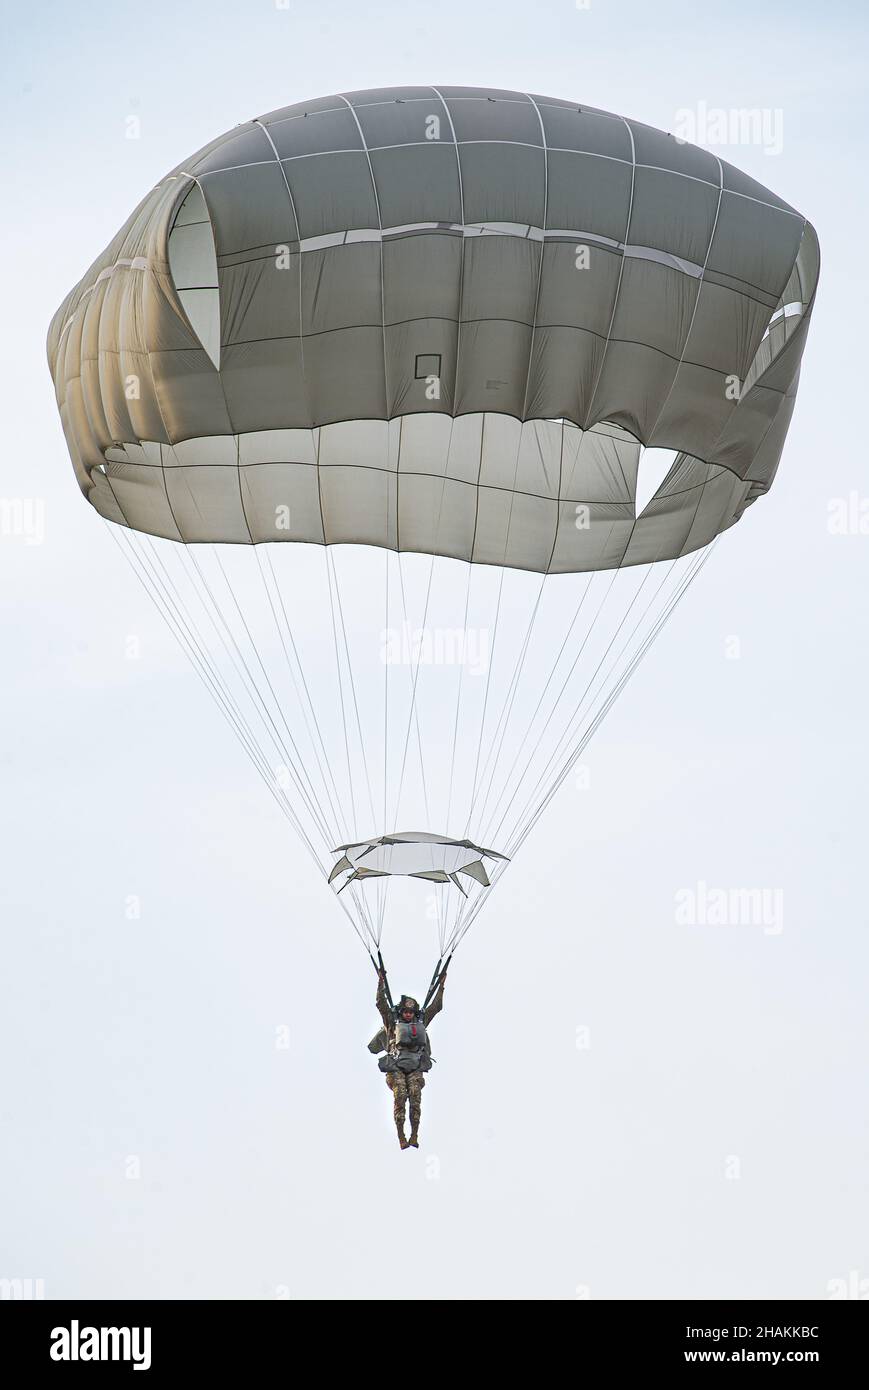 A U.S. Army paratrooper assigned to the 173rd Airborne Brigade prepares to land on Juliet Drop Zone during a joint airborne operation between the U.S. Air Force, Marine Corps, U.S. and Italian Army paratroopers on Dec. 10, 2021.    The 173rd Airborne Brigade is the U.S. Army's Contingency Response Force in Europe, providing rapidly deployable forces to the United States European, African, and Central Command areas of responsibility. Forward deployed across Italy and Germany, the brigade routinely trains alongside NATO allies and partners to build partnerships and strengthen the alliance.    (U Stock Photo